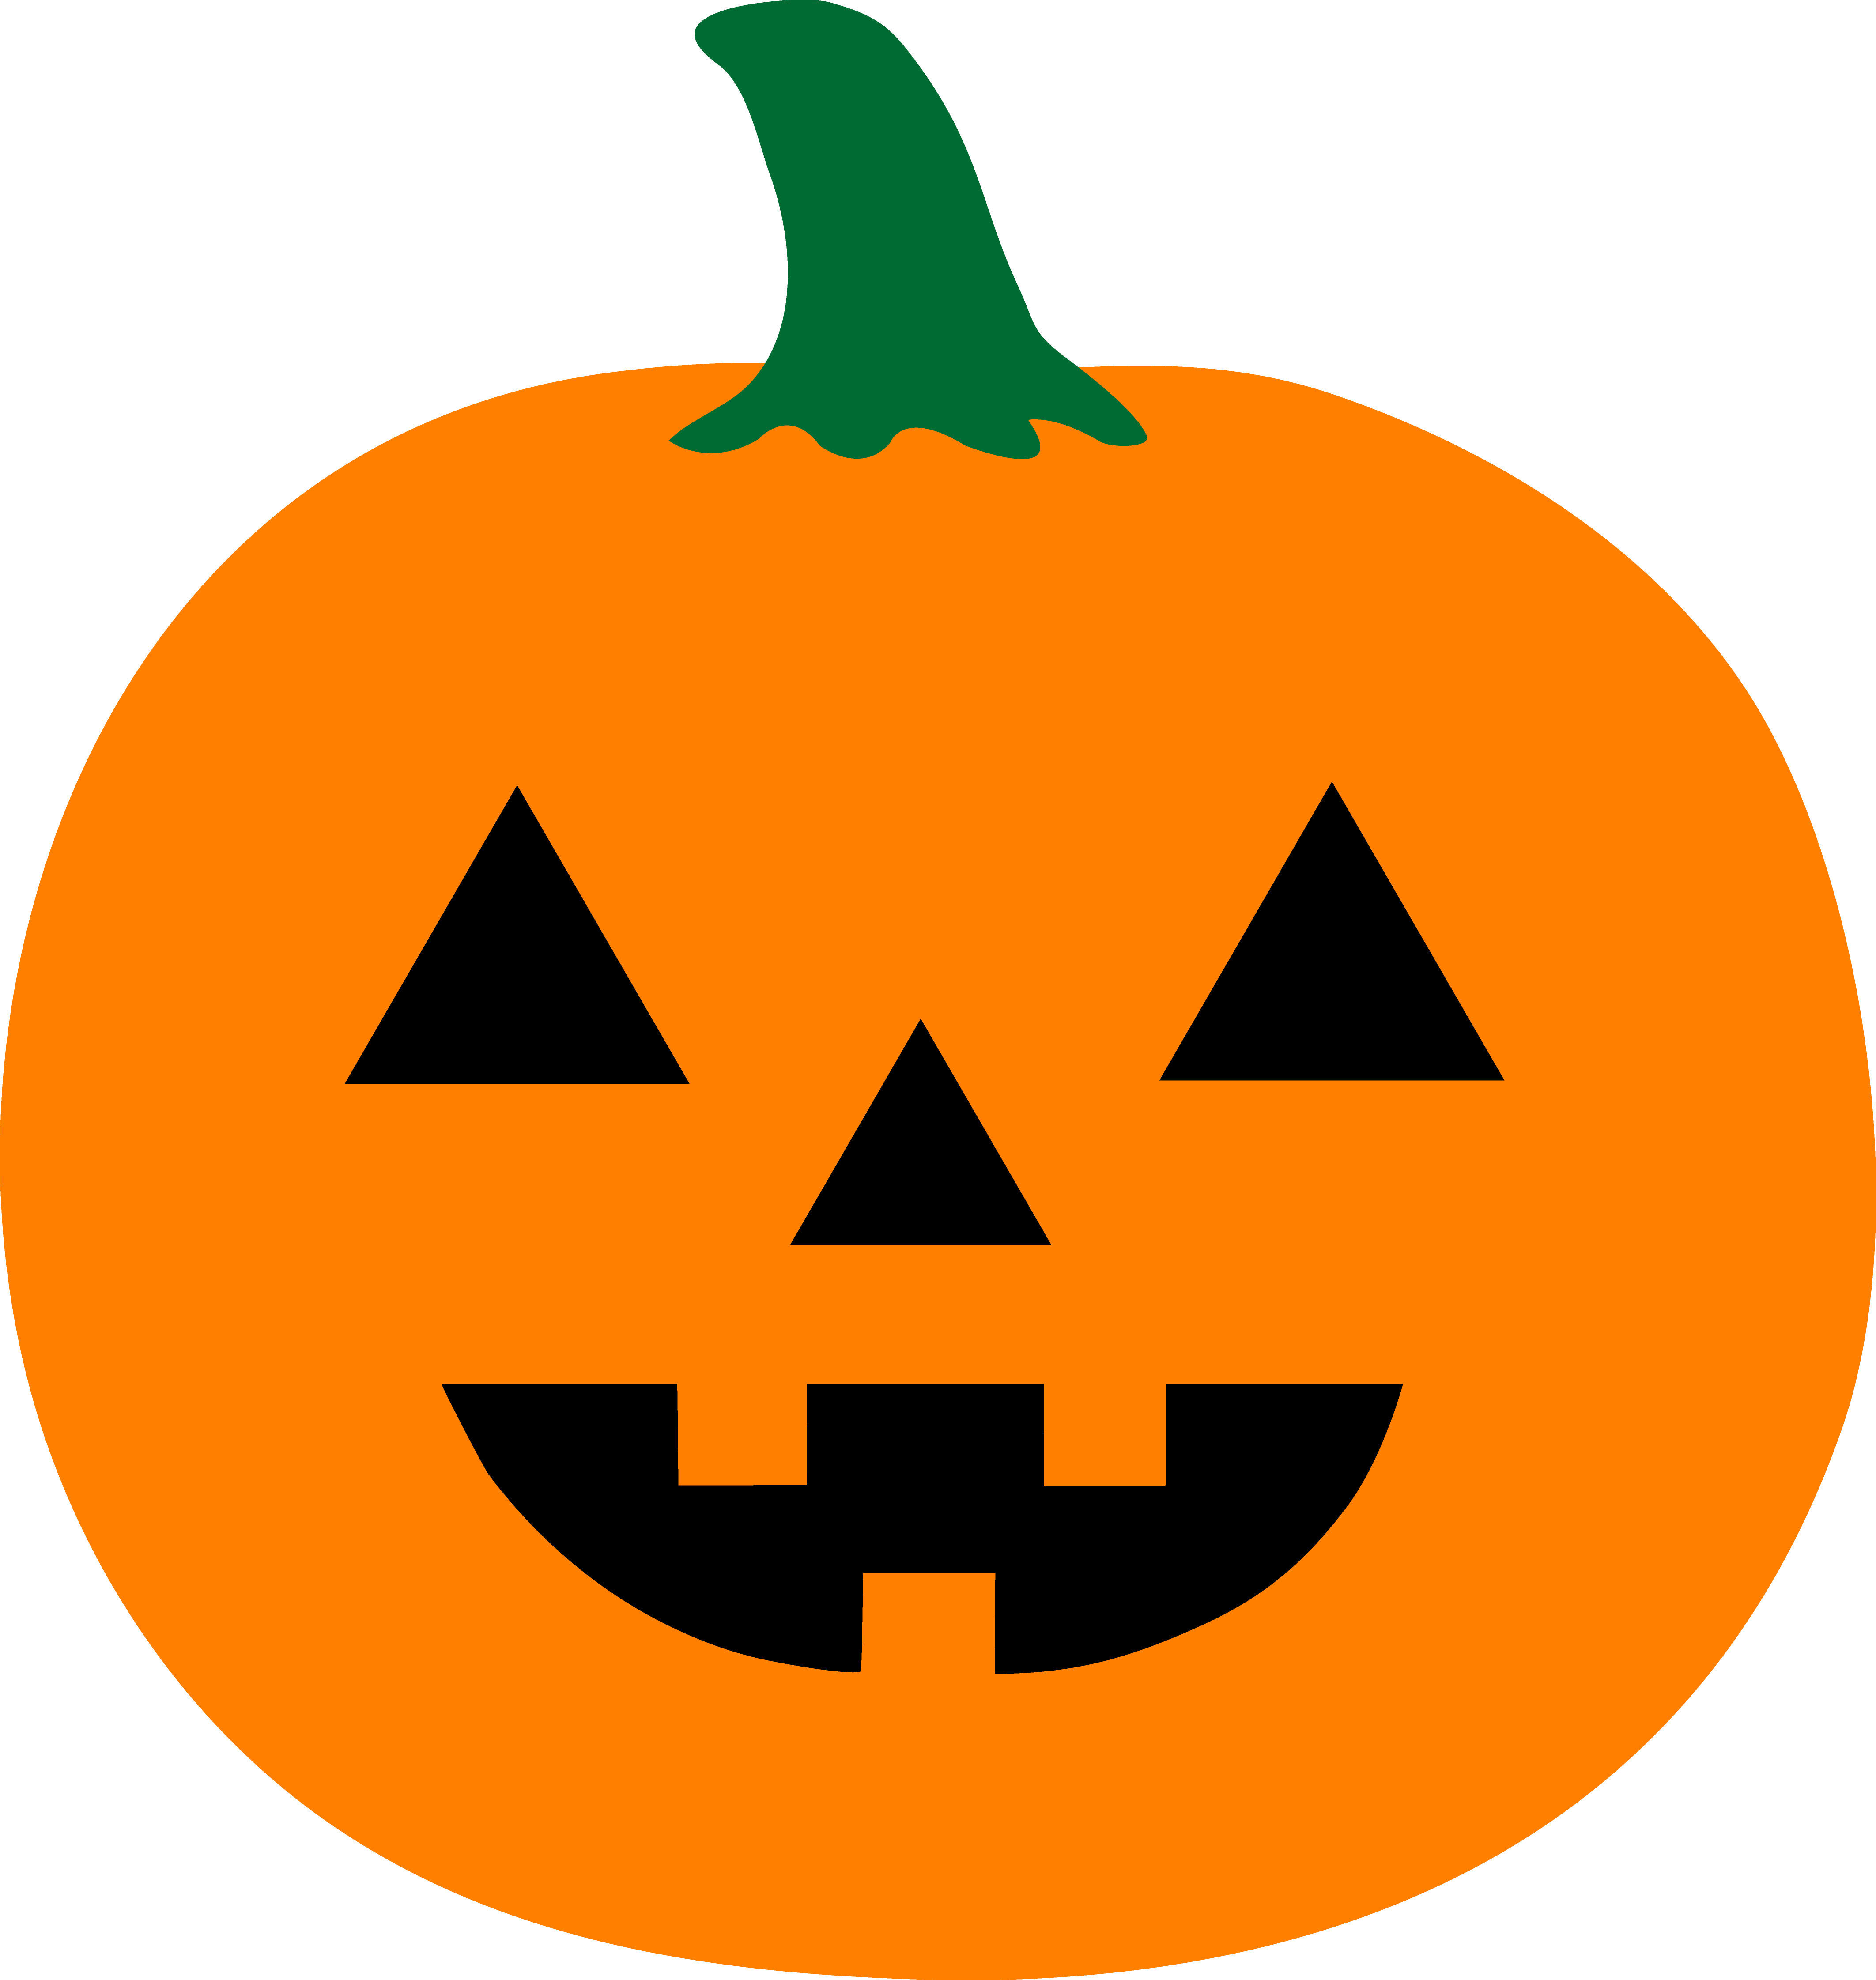 Cute Jack O Lantern Clip Art | Clipart library - Free Clipart Images